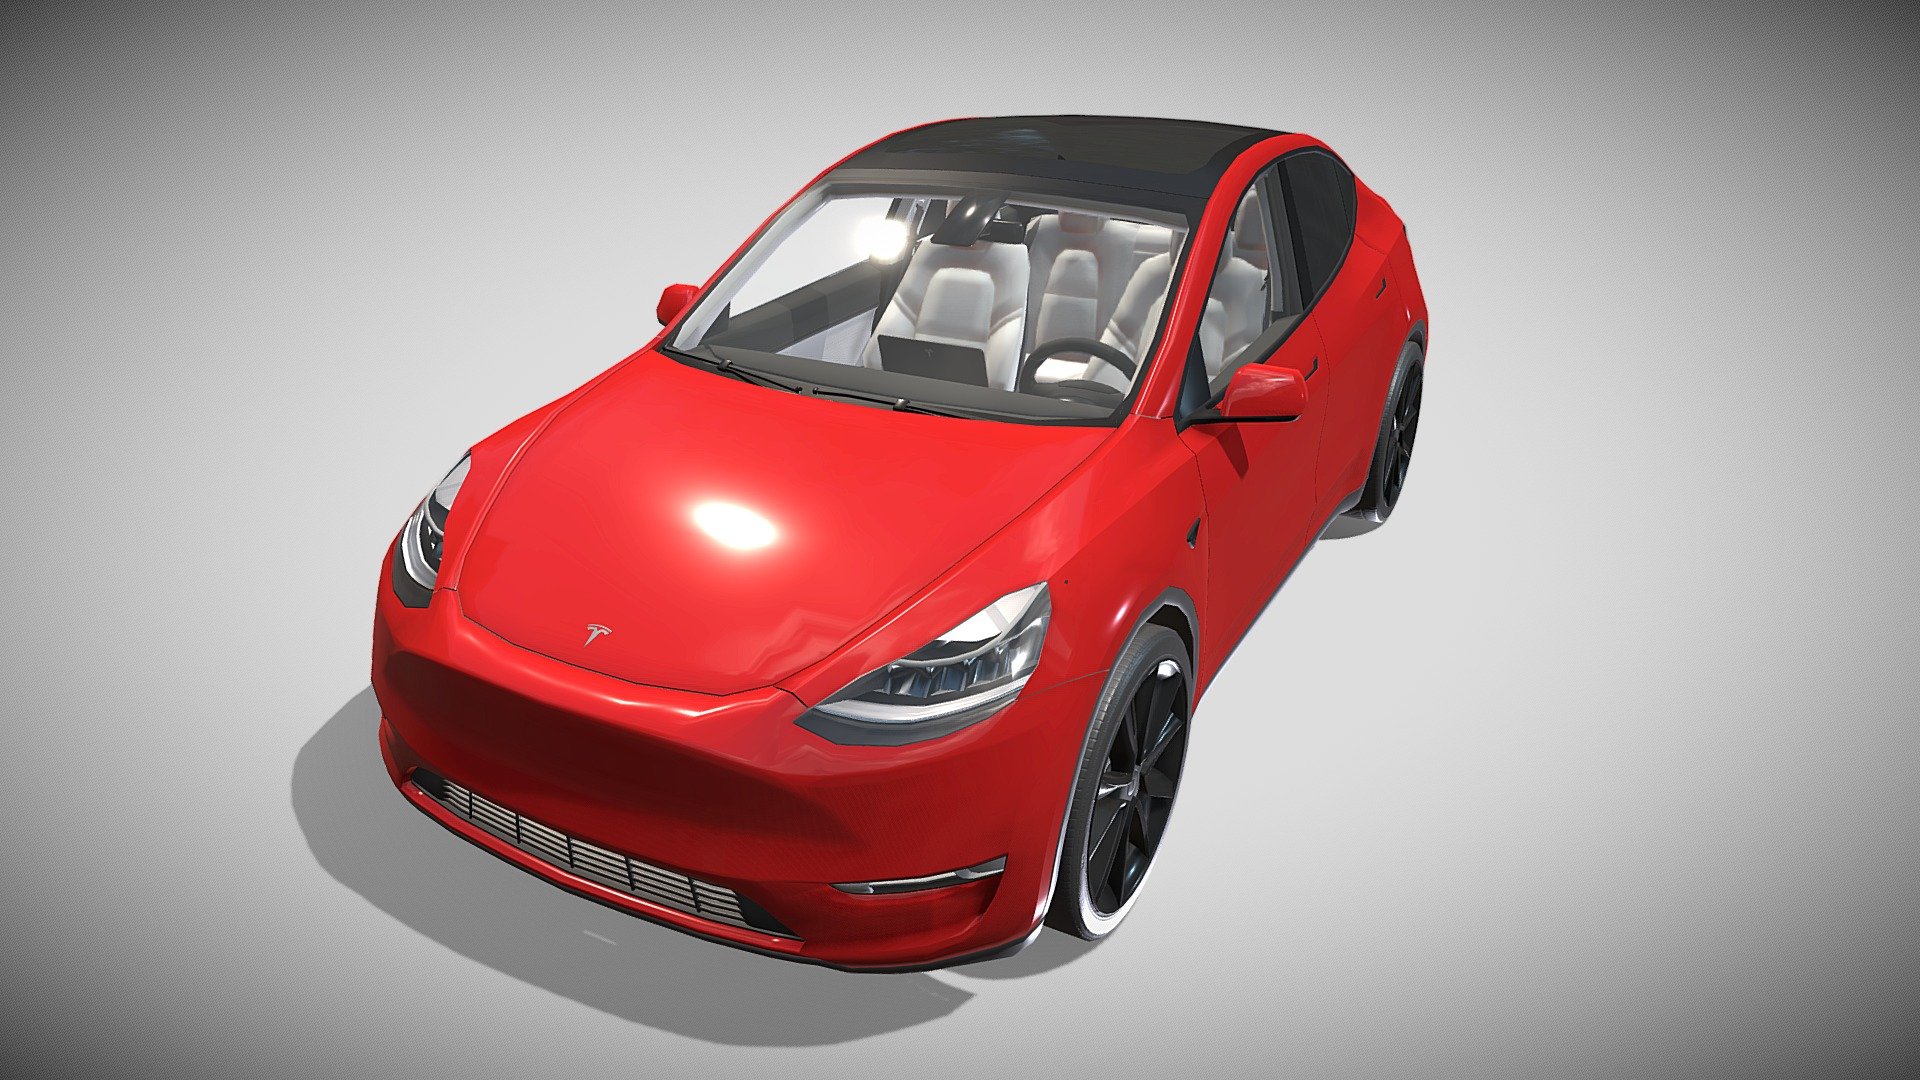 Tesla Model Y AWD with full chassis (battery pack, 2 motor setup, brakes, linkages, suspension, steering) and a detailed interior 3d model rendered with Cycles in Blender, as per seen on attached images.

File formats:
-.blend, rendered with cycles, as seen in the images;
-.blend, open, rendered with cycles, as seen in the images;
-.blend, rendered with cycles, with a see-through of the chassis, as seen in the images;
-.blend, open, rendered with cycles, with a see-through of the chassis, as seen in the images;
-.obj, with materials applied;
-.obj, open, with materials applied;
-.dae, with materials applied;
-.dae, open, with materials applied;
-.fbx, with material slots applied;
-.fbx, open, with material slots applied;
-.stl;
-.stl, open;

Files come named appropriately and split by file format.

3D Software:
The 3D model was originally created in Blender 2.79 and rendered with Cycles.

Materials and textures:
The models have materials applied in all formats, and are ready to import and render.
T - Tesla Model Y AWD Red with interior and chassis - Buy Royalty Free 3D model by dragosburian 3d model